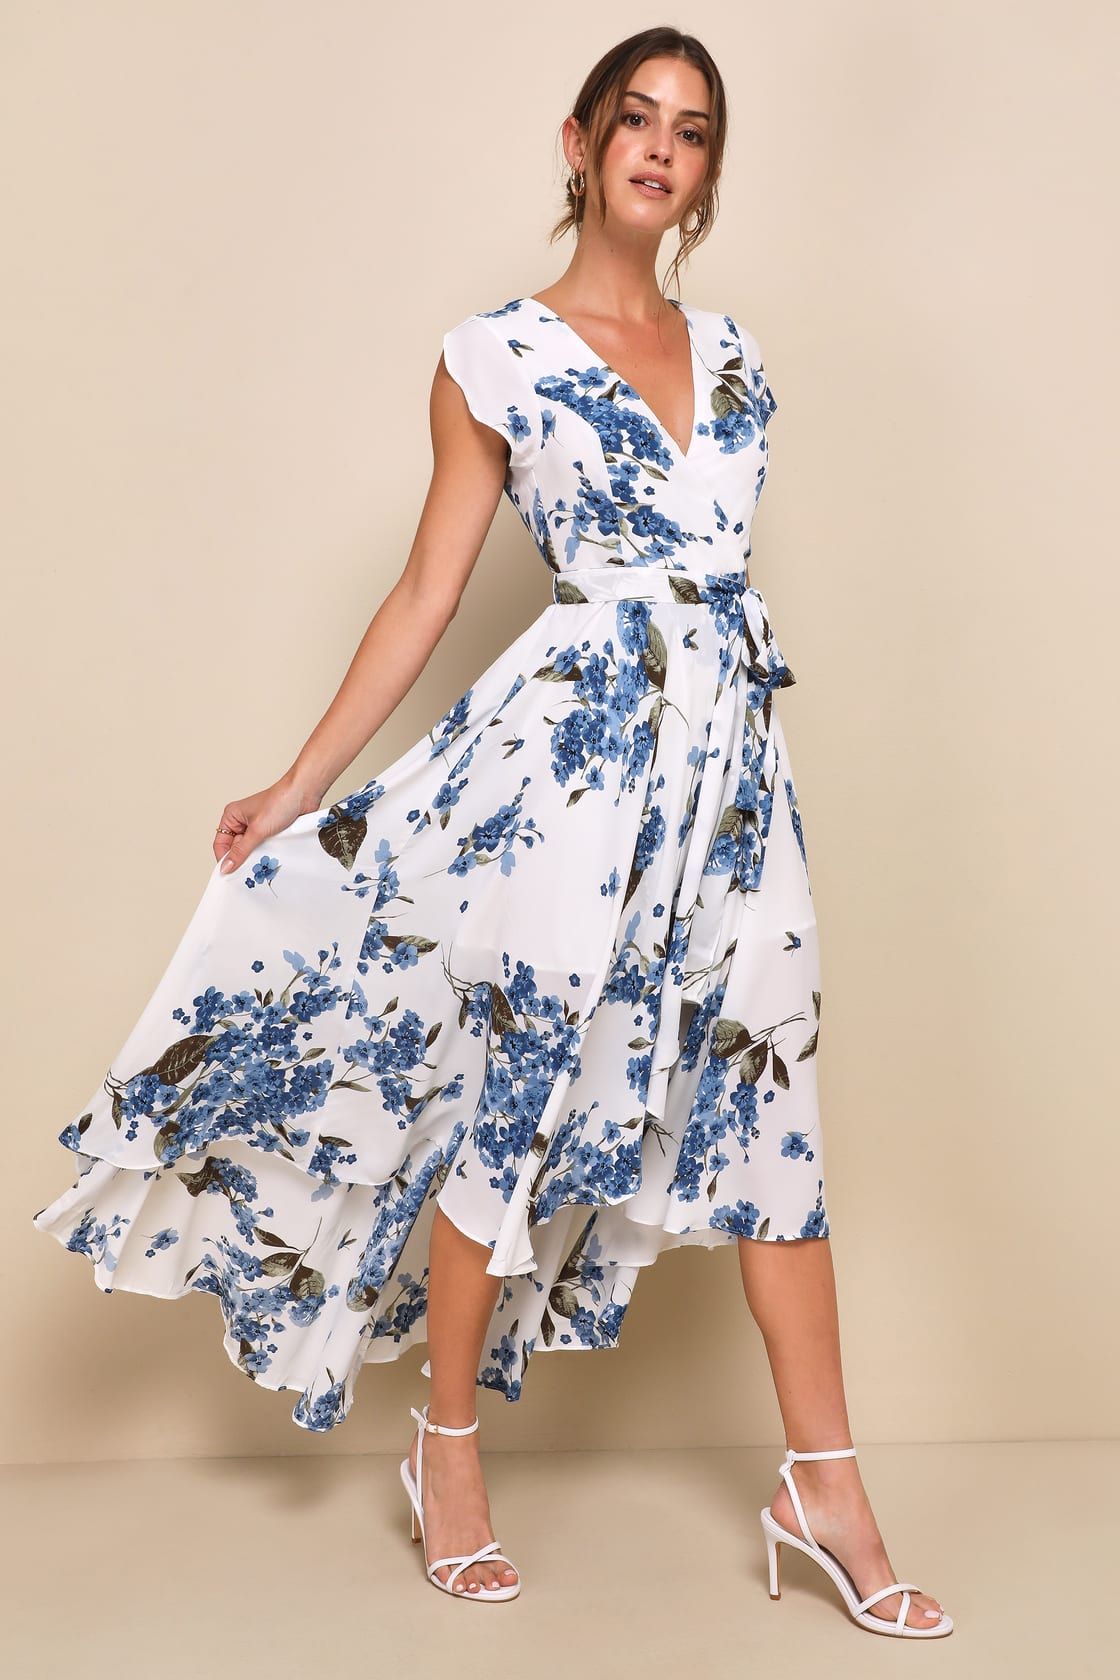 French Countryside White Floral Print High-Low Dress | Lulus